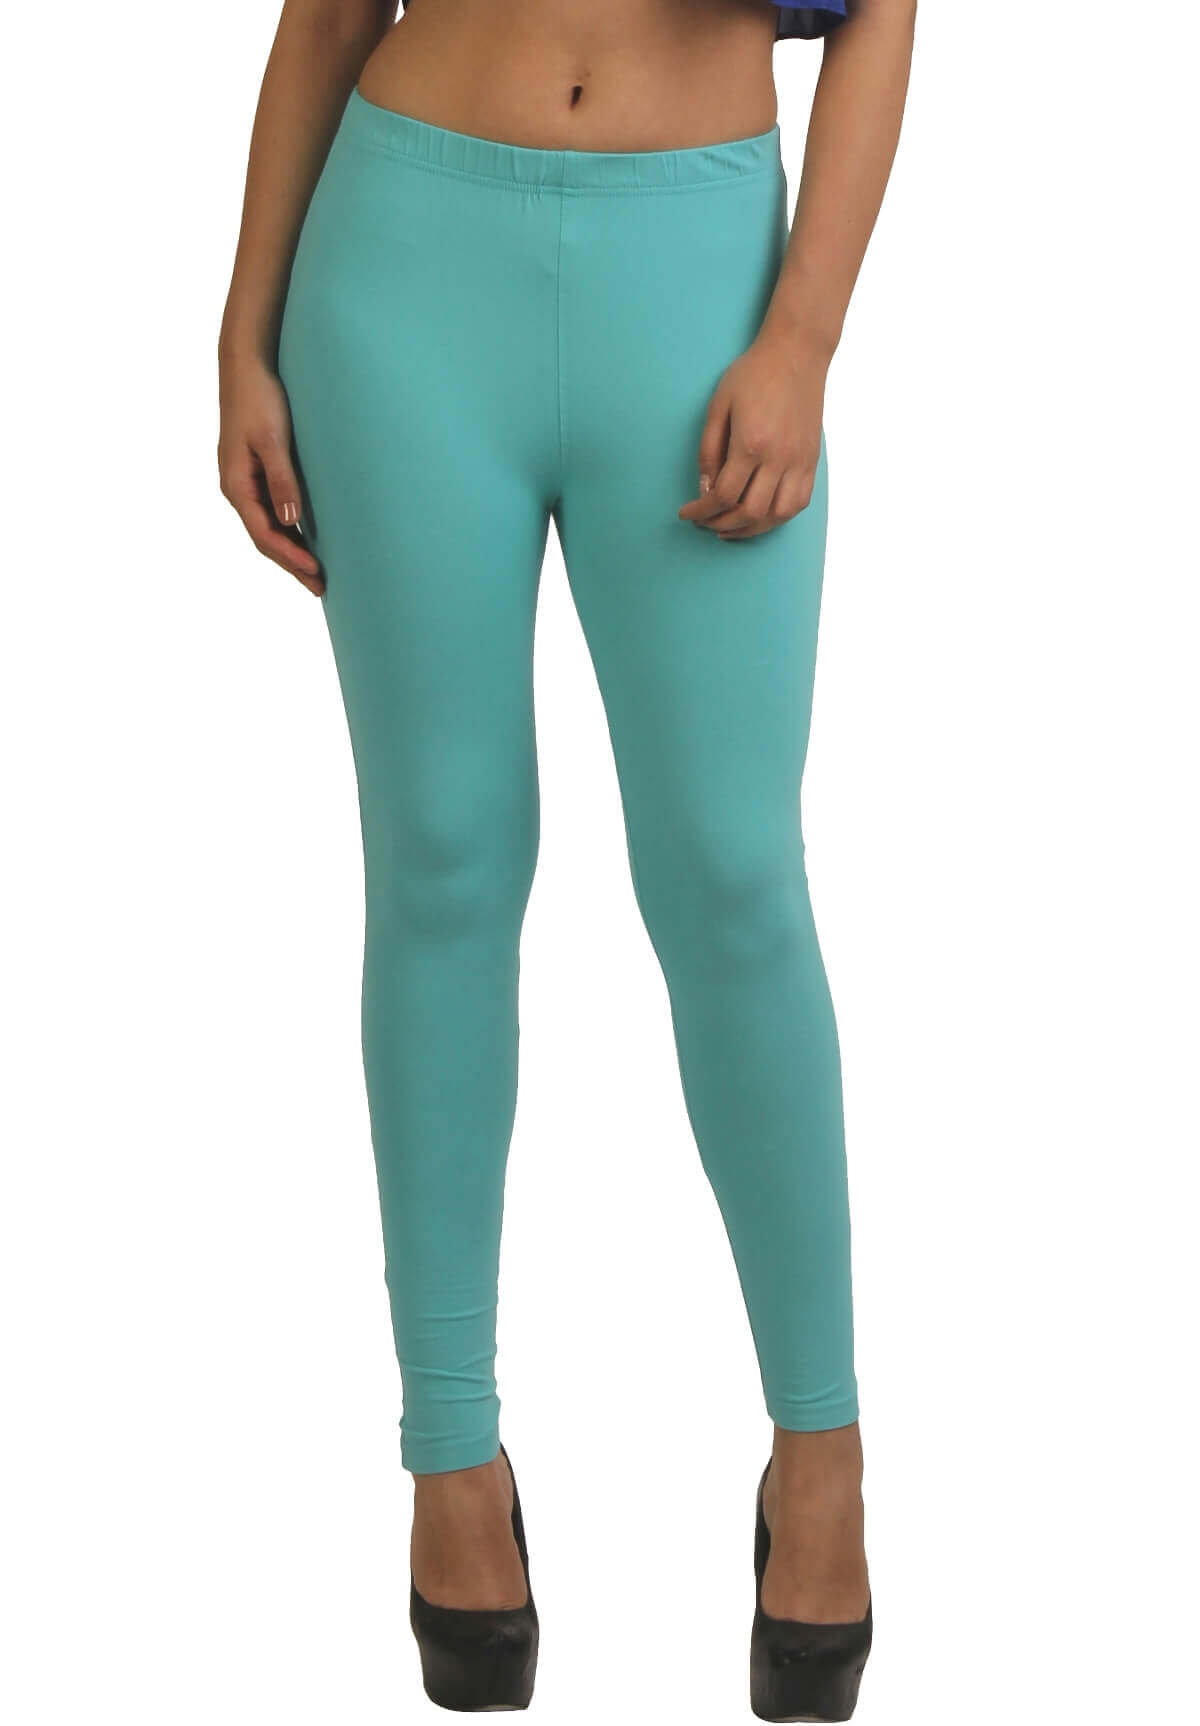 Buy Stylish Spandex Leggings Collection At Best Prices Online